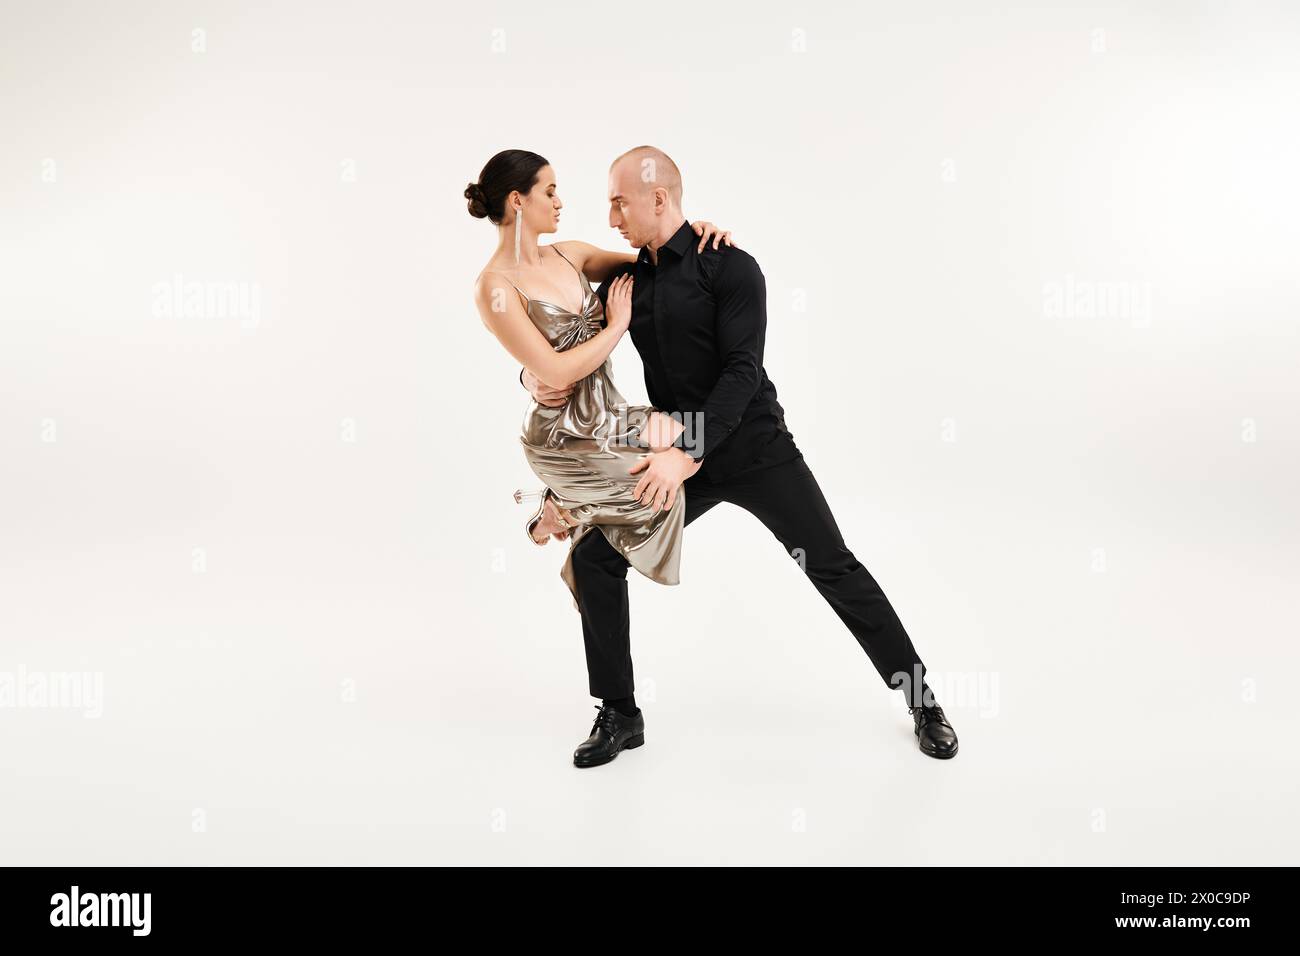 A young man and a woman acrobatically dance together in perfect sync against a white studio backdrop. Stock Photo